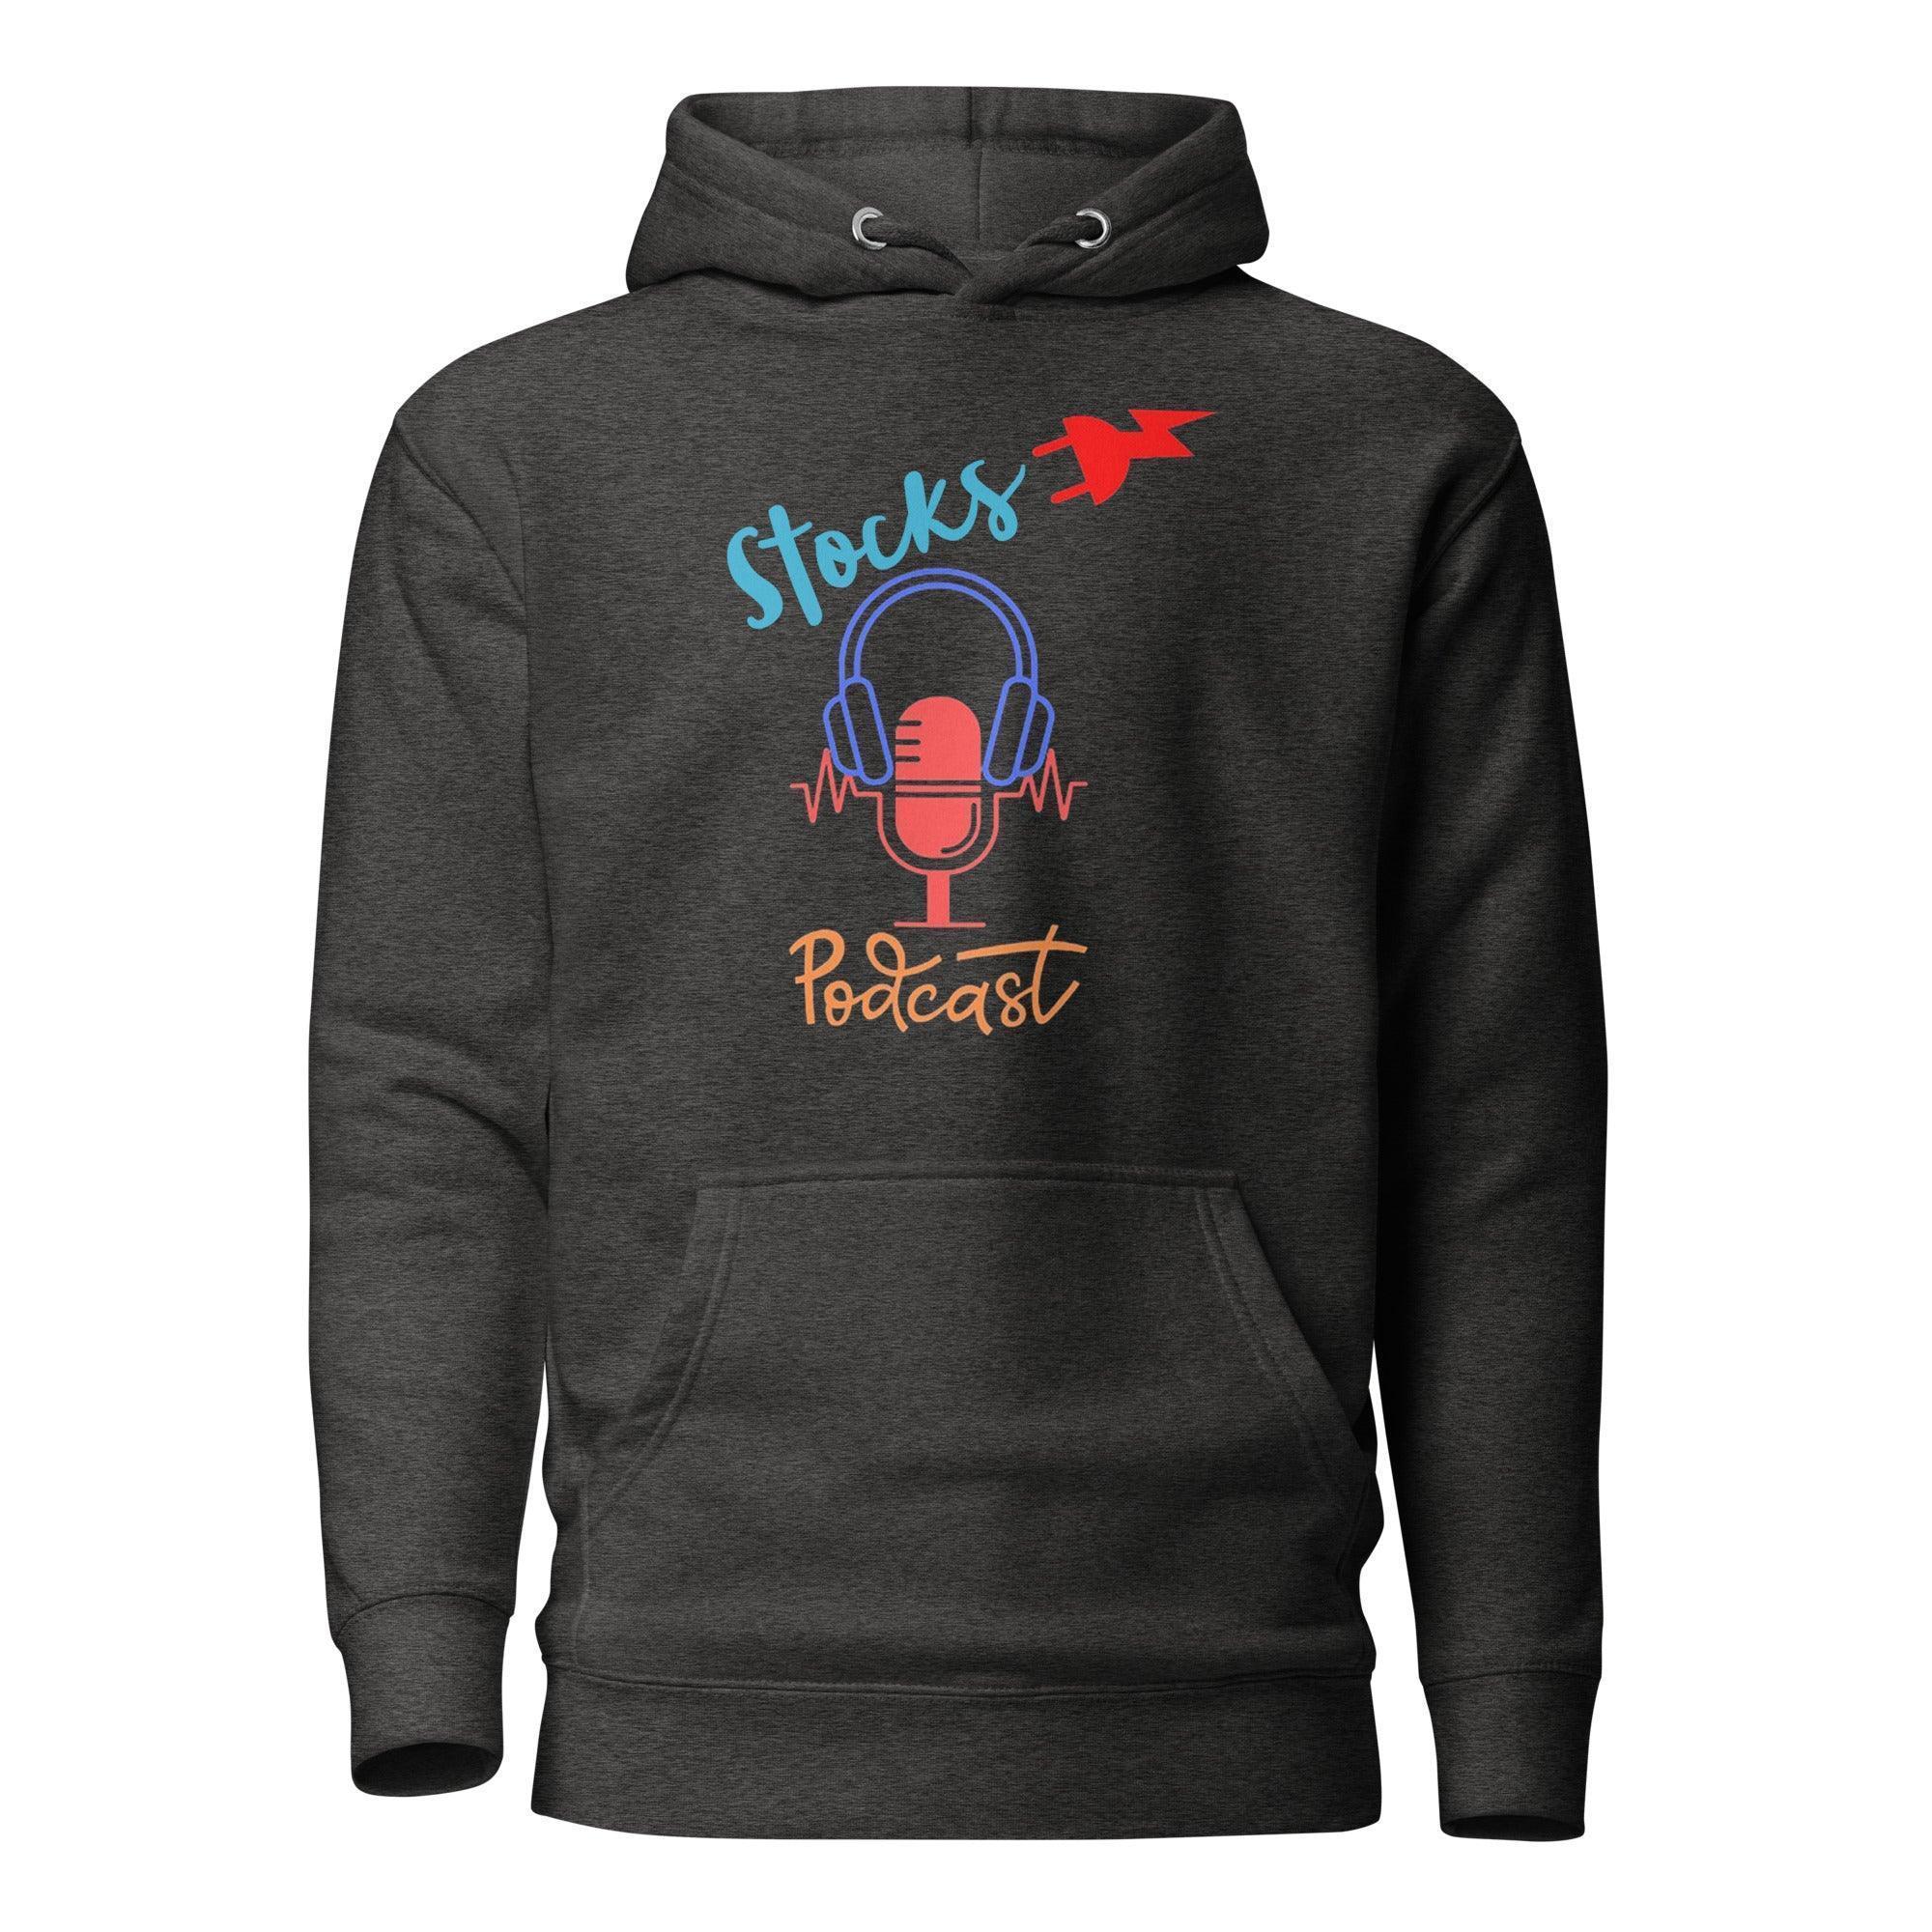 Stocks Podcast Pullover Hoodie - InvestmenTees